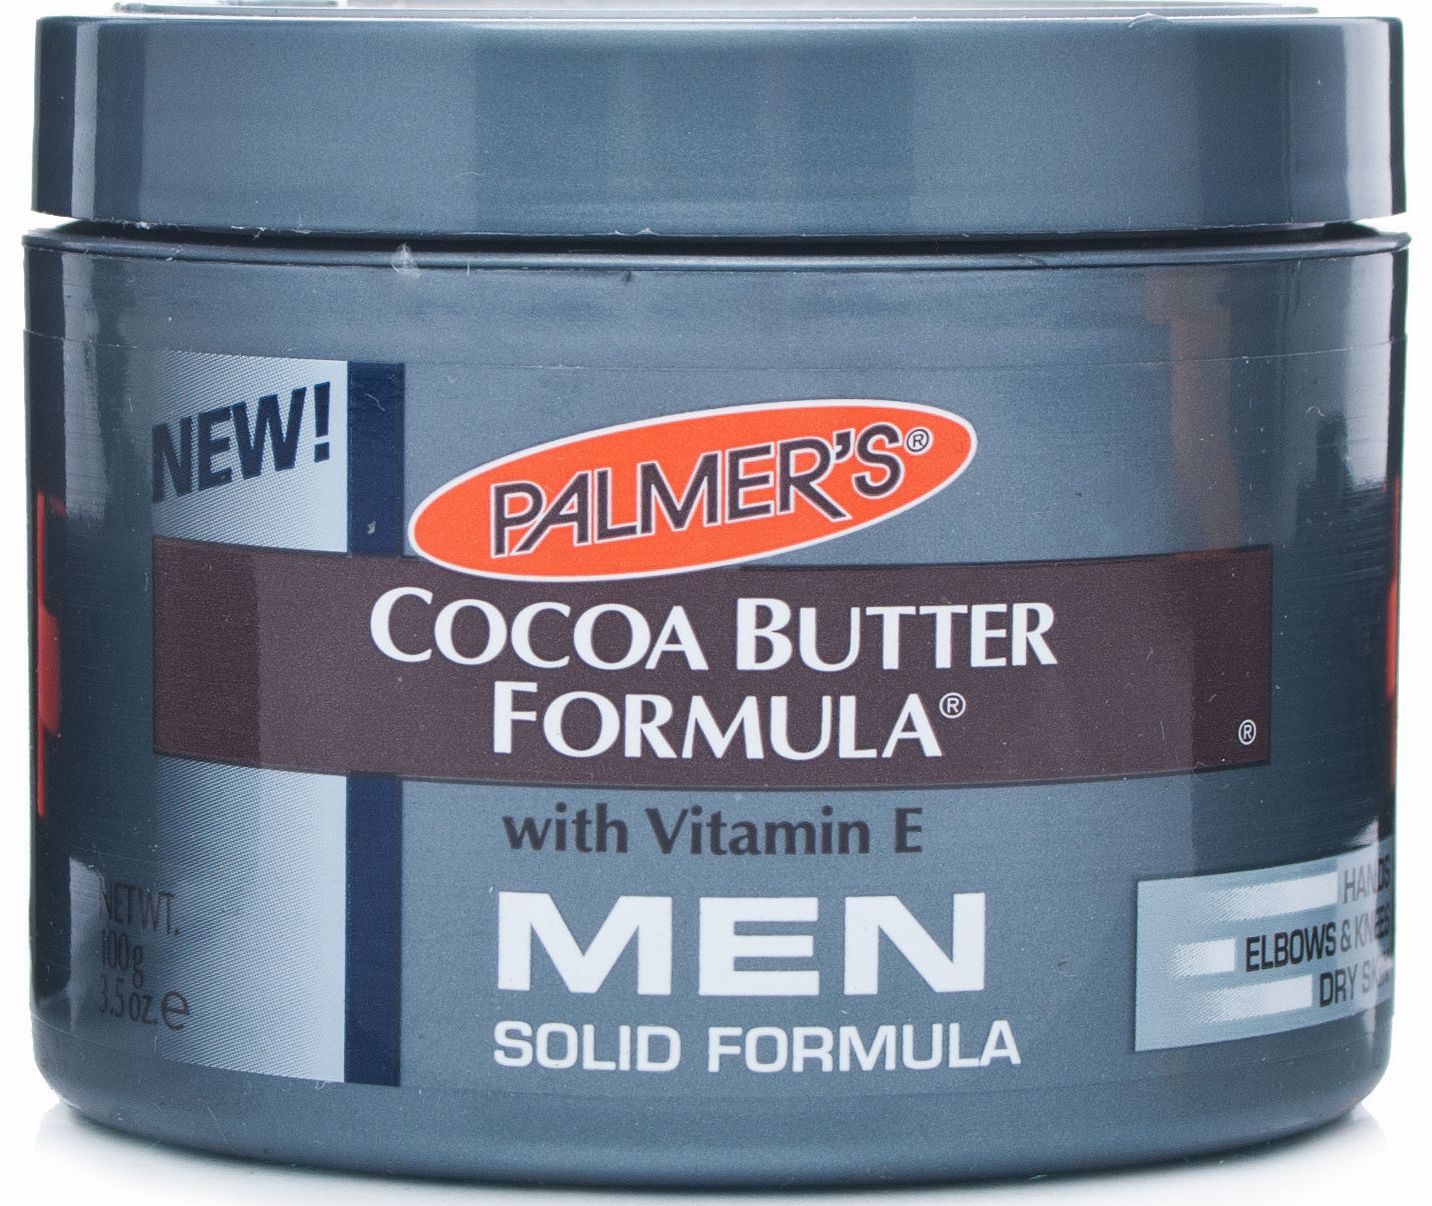 Palmers Cocoa Butter Formula Moisturising Solid